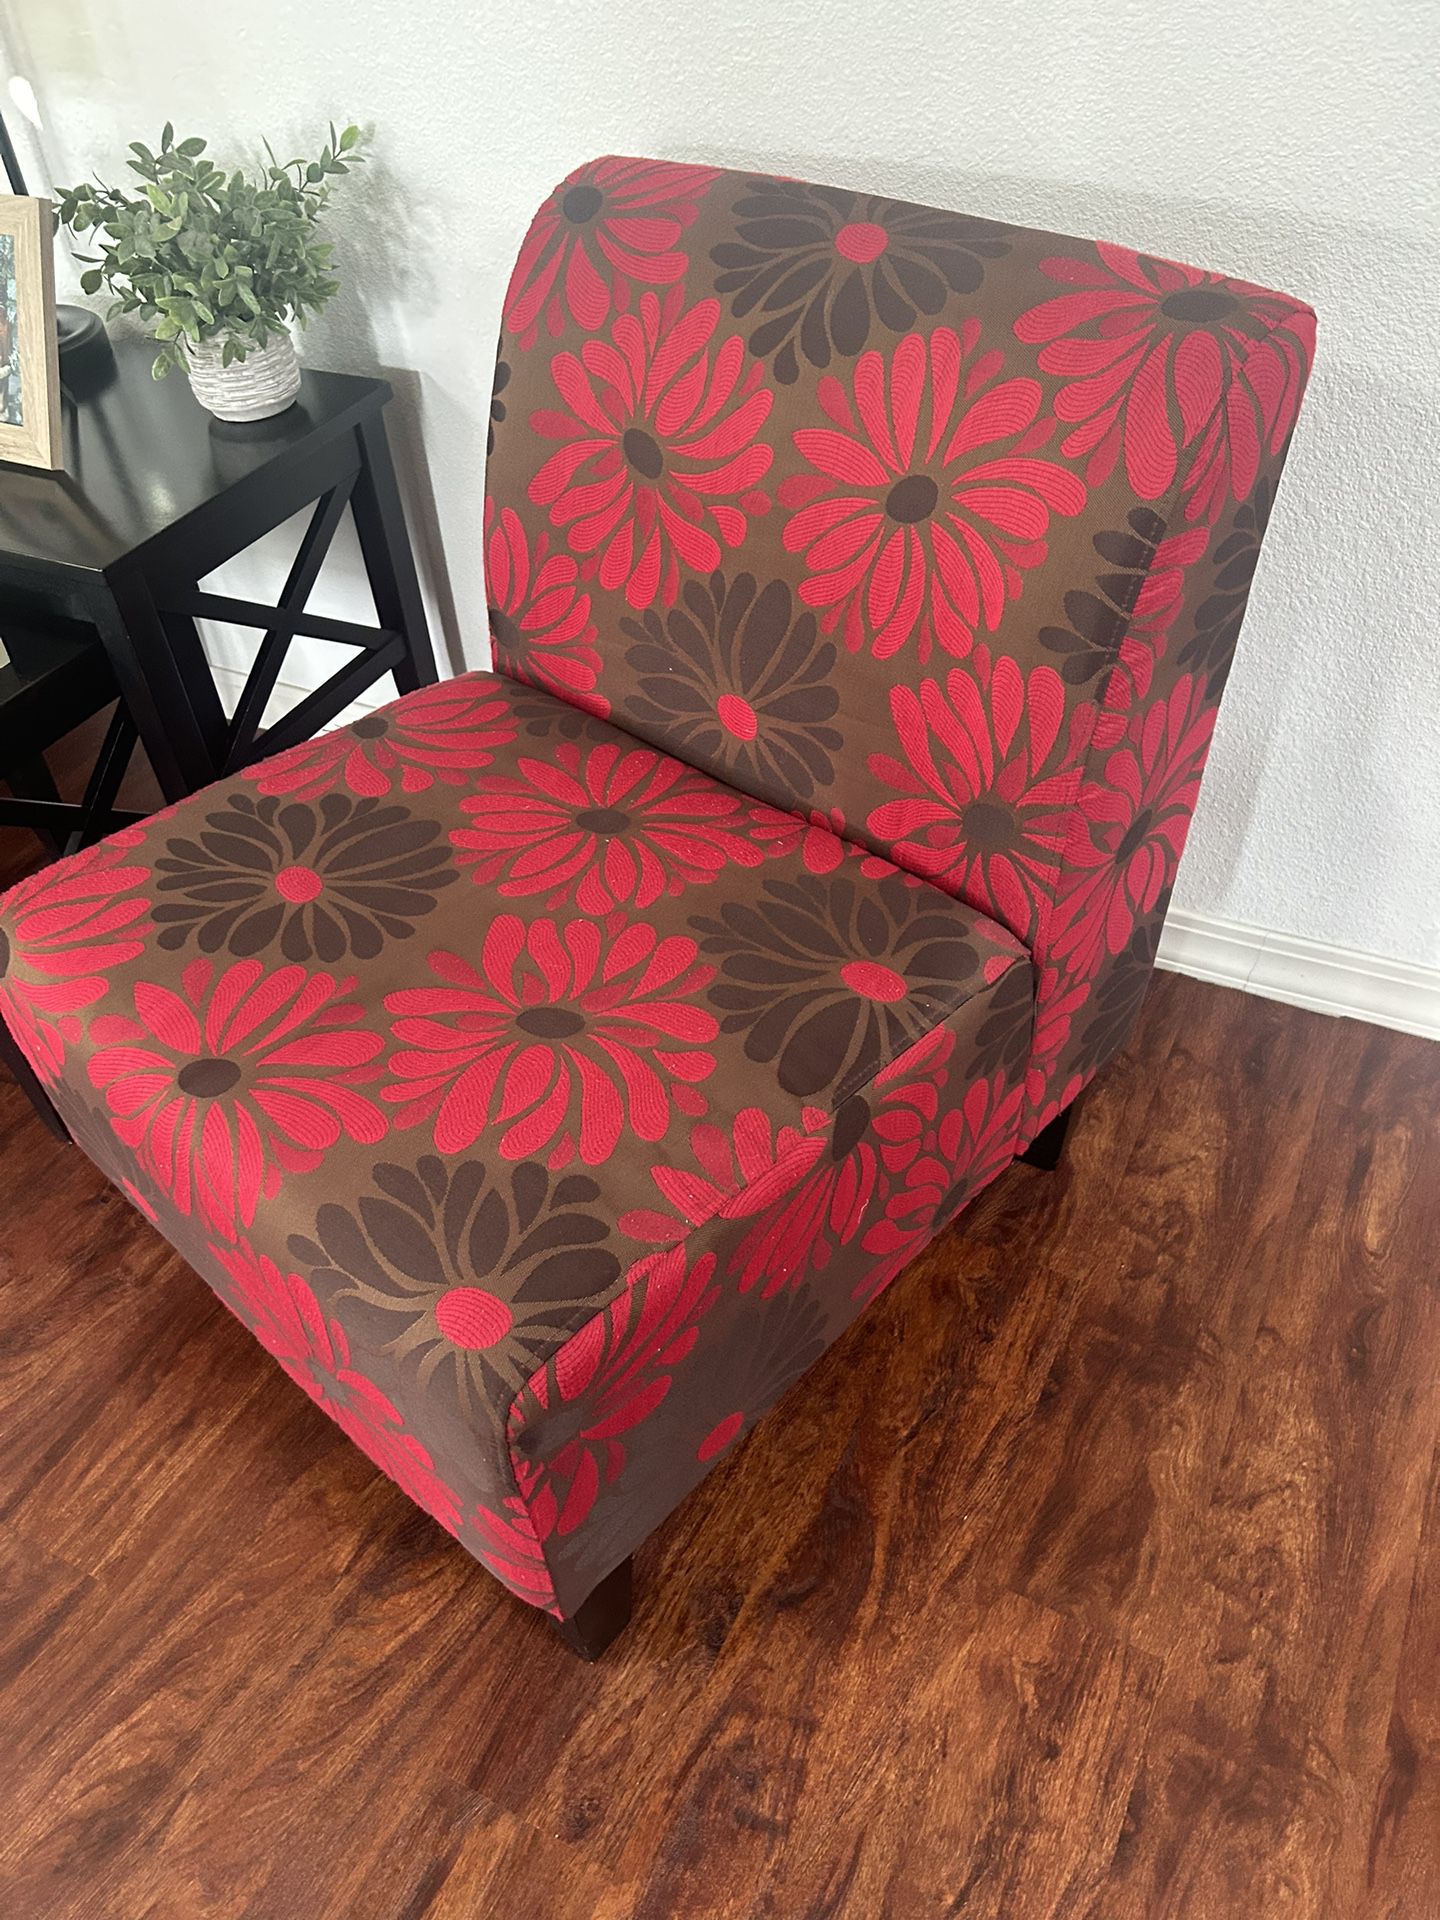 70 For 2 Accent Chairs Red/Brown 